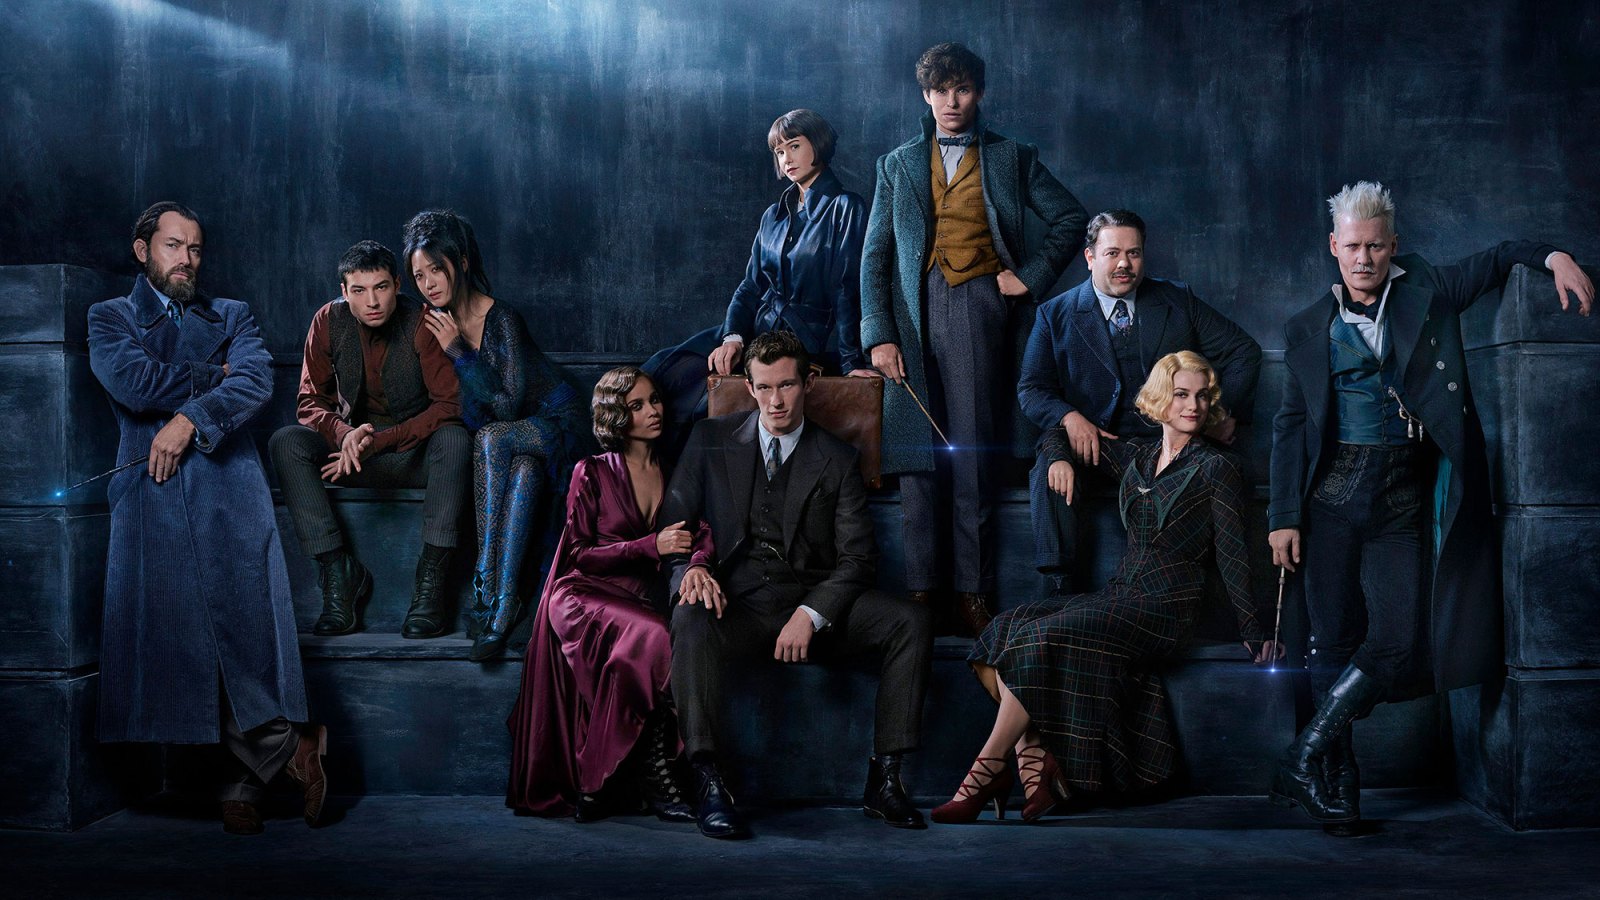 Fantastic Beasts 3' Movie: Everything We Know So Far